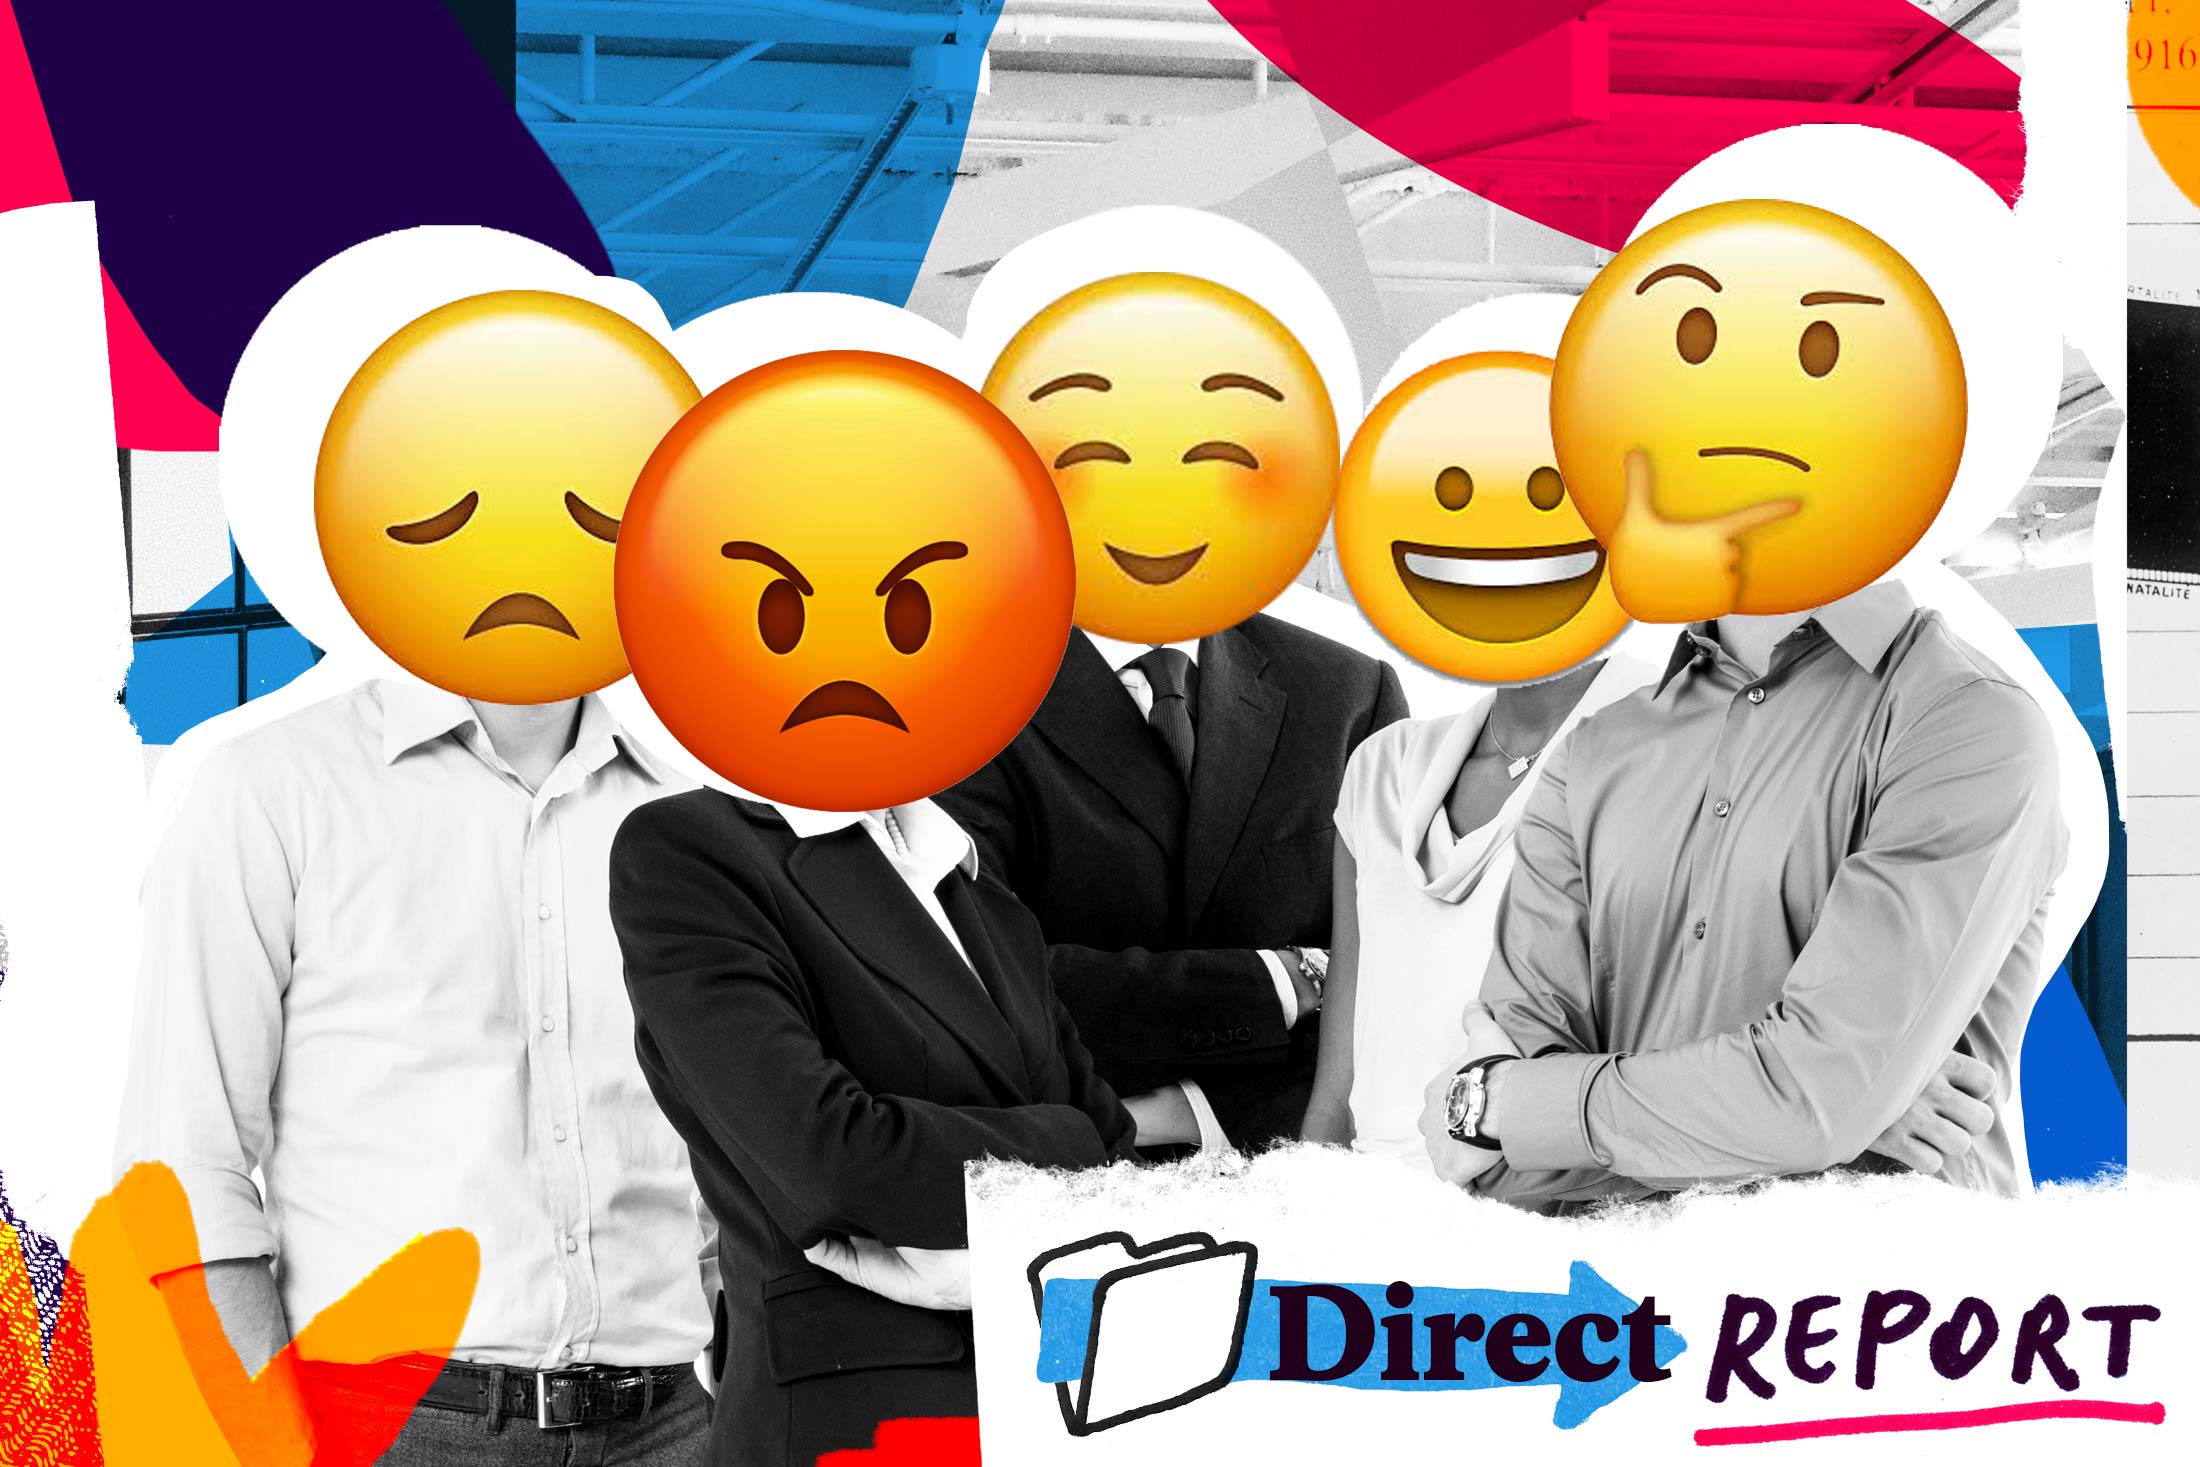 A bunch of employees with varying emoji for faces